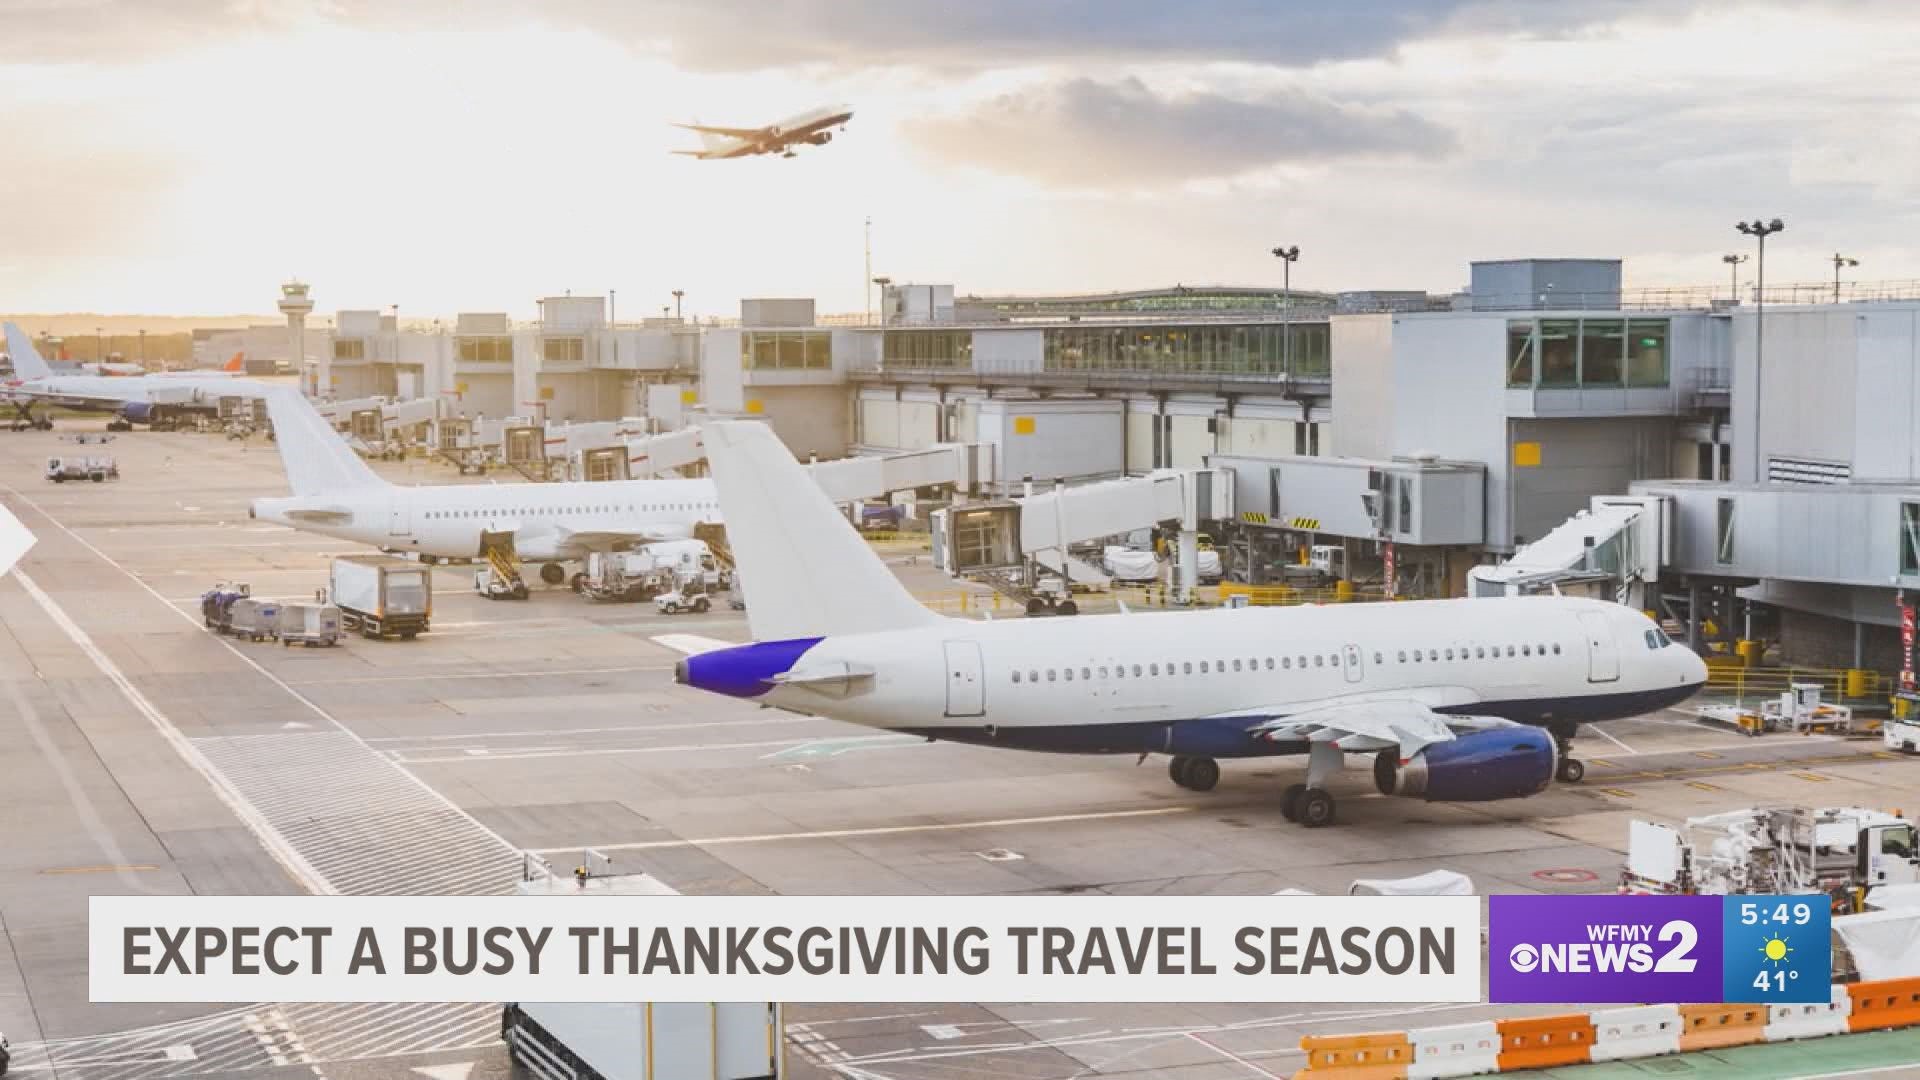 AAA forecasts 54.6 million people will travel this Thanksgiving.